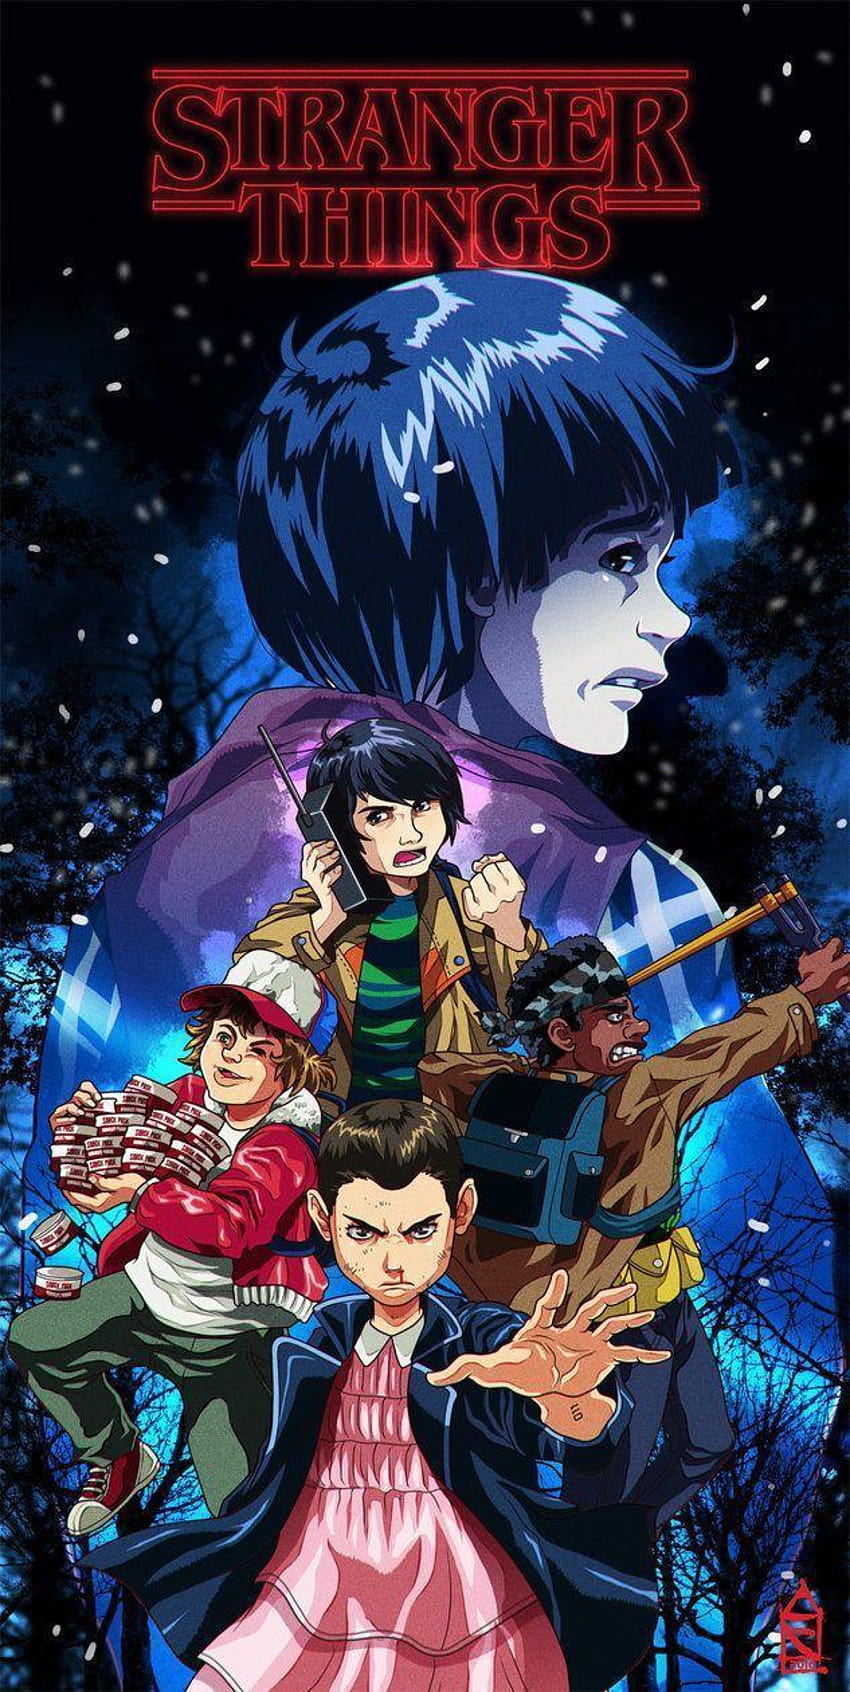 Stranger Things Gets A Classic '80s Anime Makeover